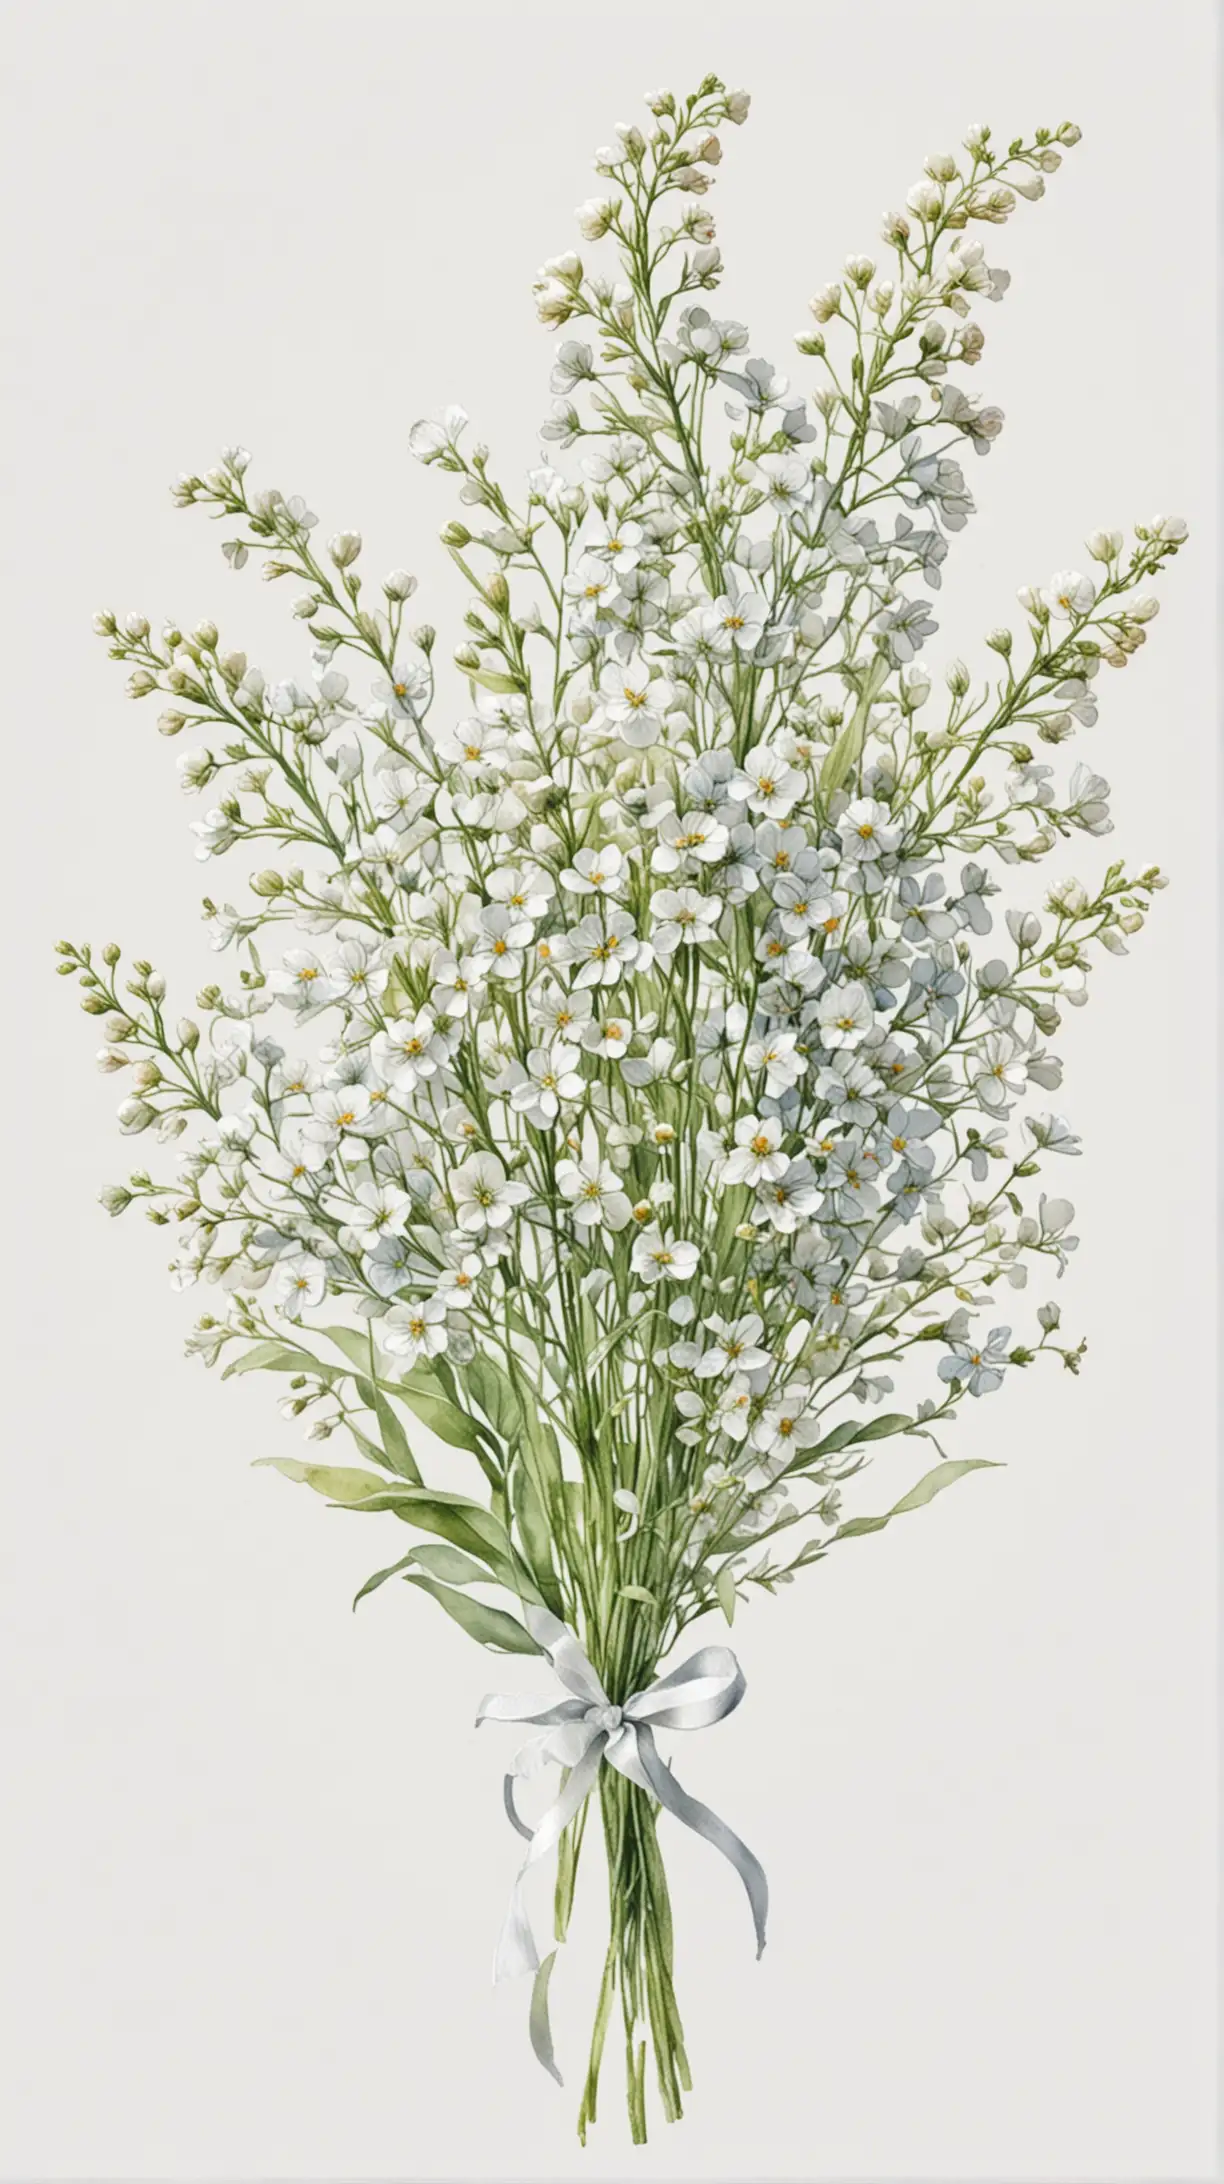 Delicate Watercolor Babys Breath Flower Bouquet on White Background